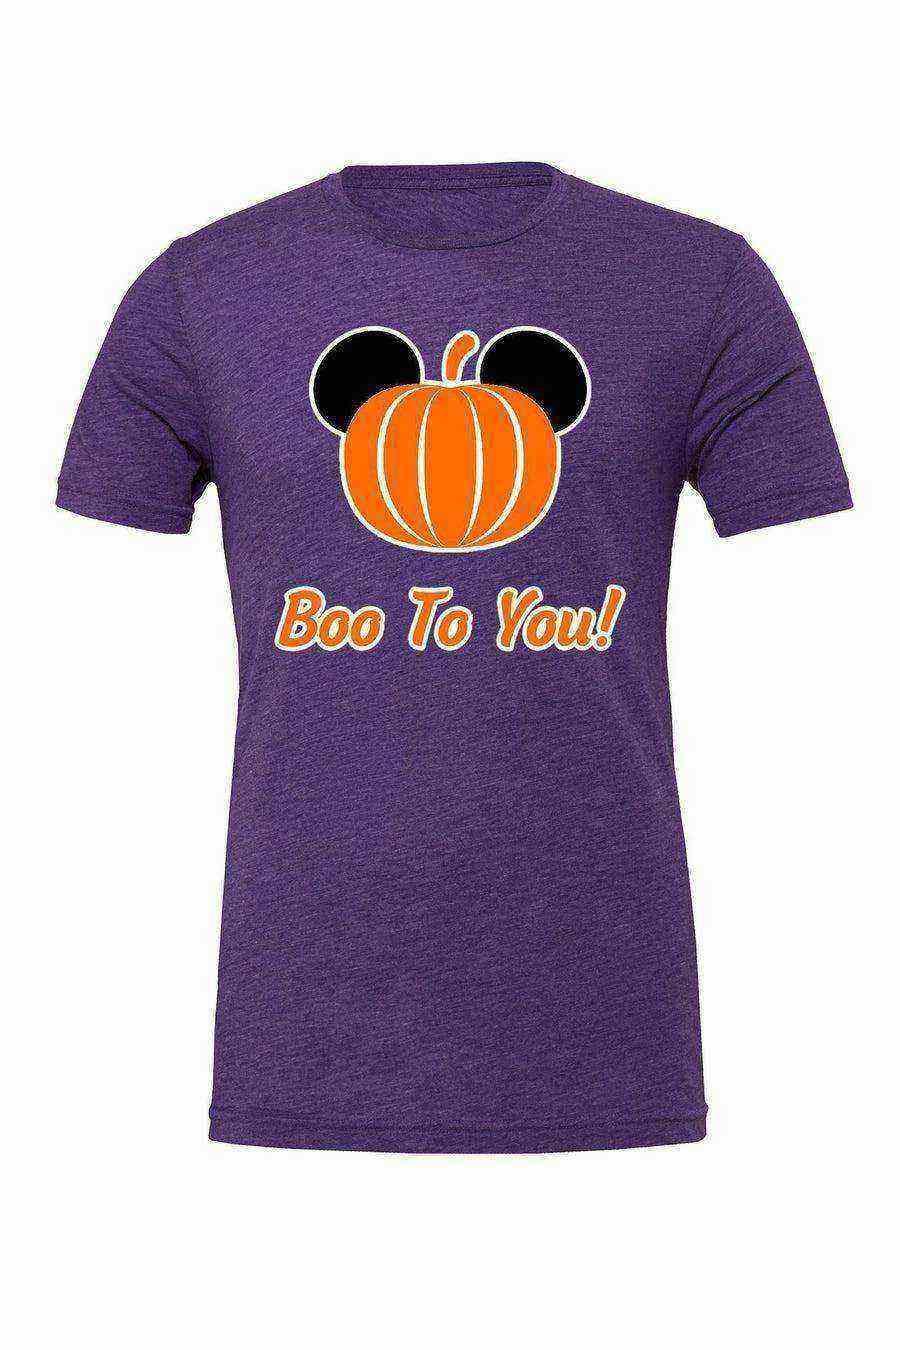 Youth | Boo to You Tee | Halloween - Dylan's Tees